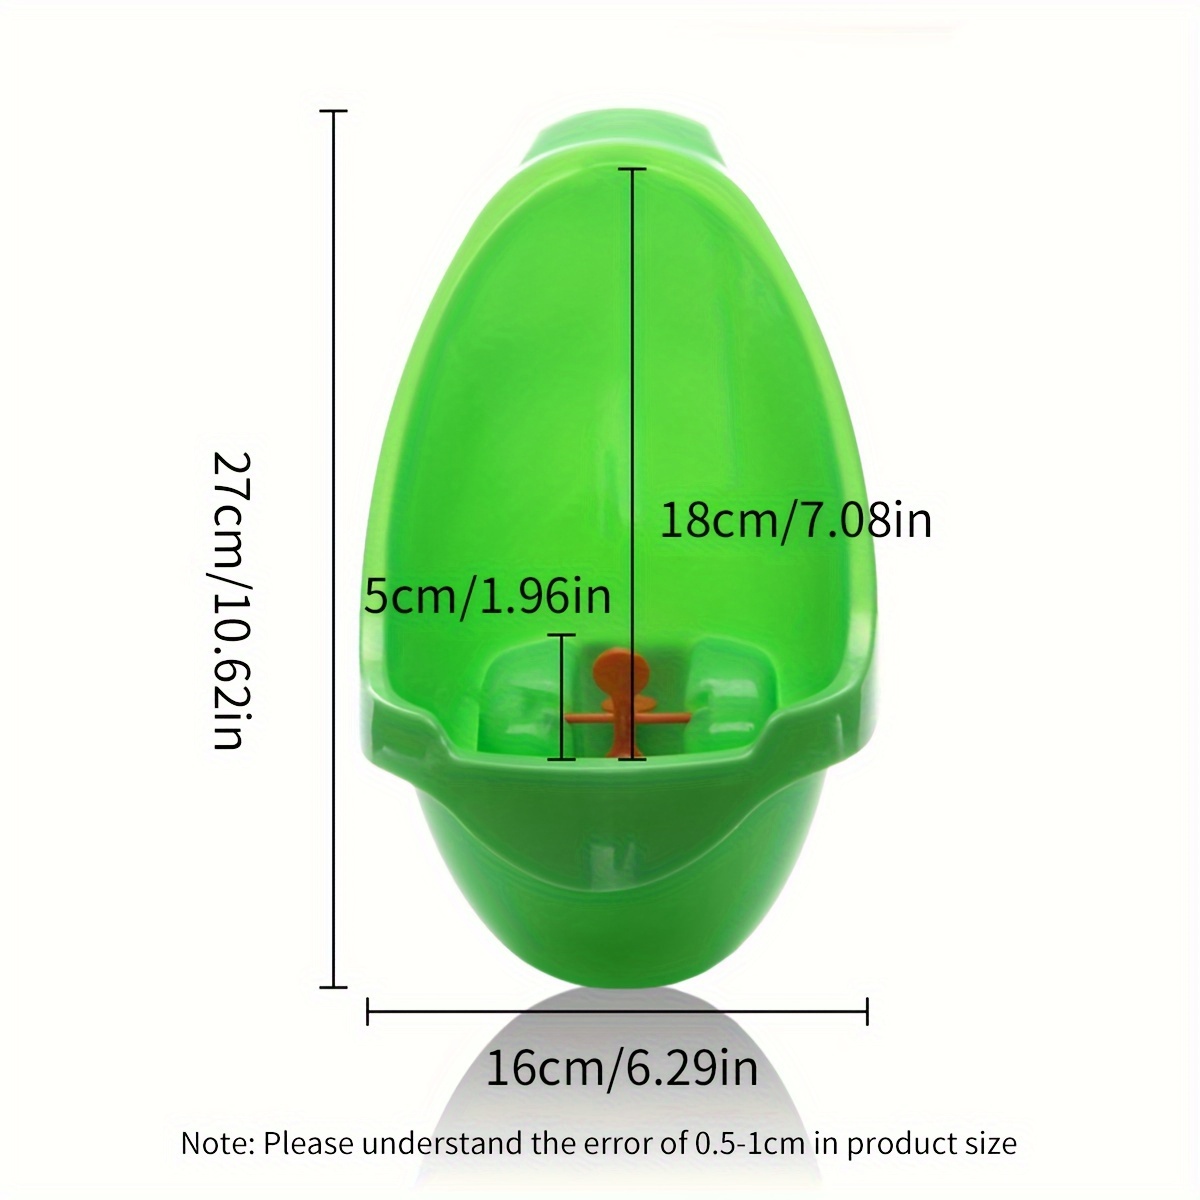 1pc frog shaped potty training urinal wall mounted polypropylene material kid friendly design with whirling target easy   7 08x6 29x10 62 inches details 6